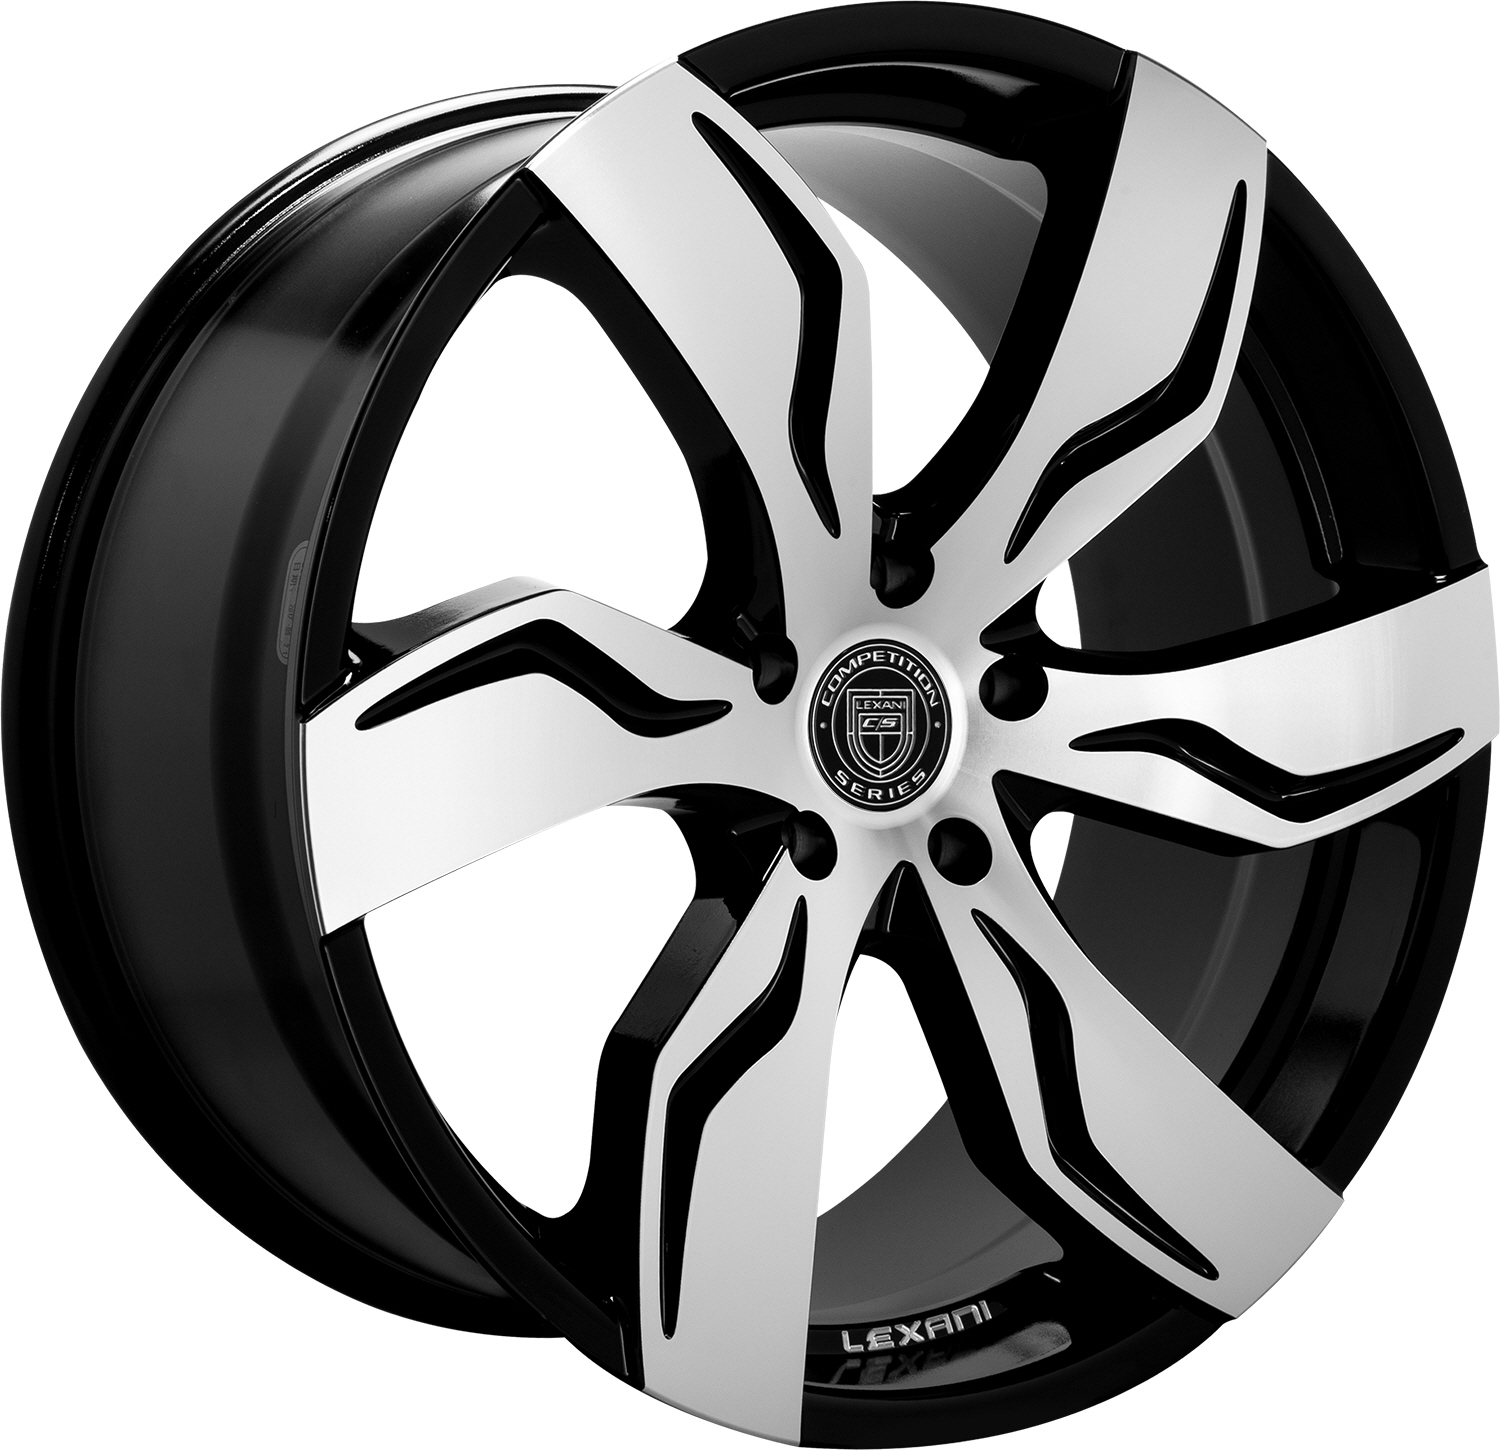 675 - ZAGATO  WHEELS AND RIMS PACKAGES